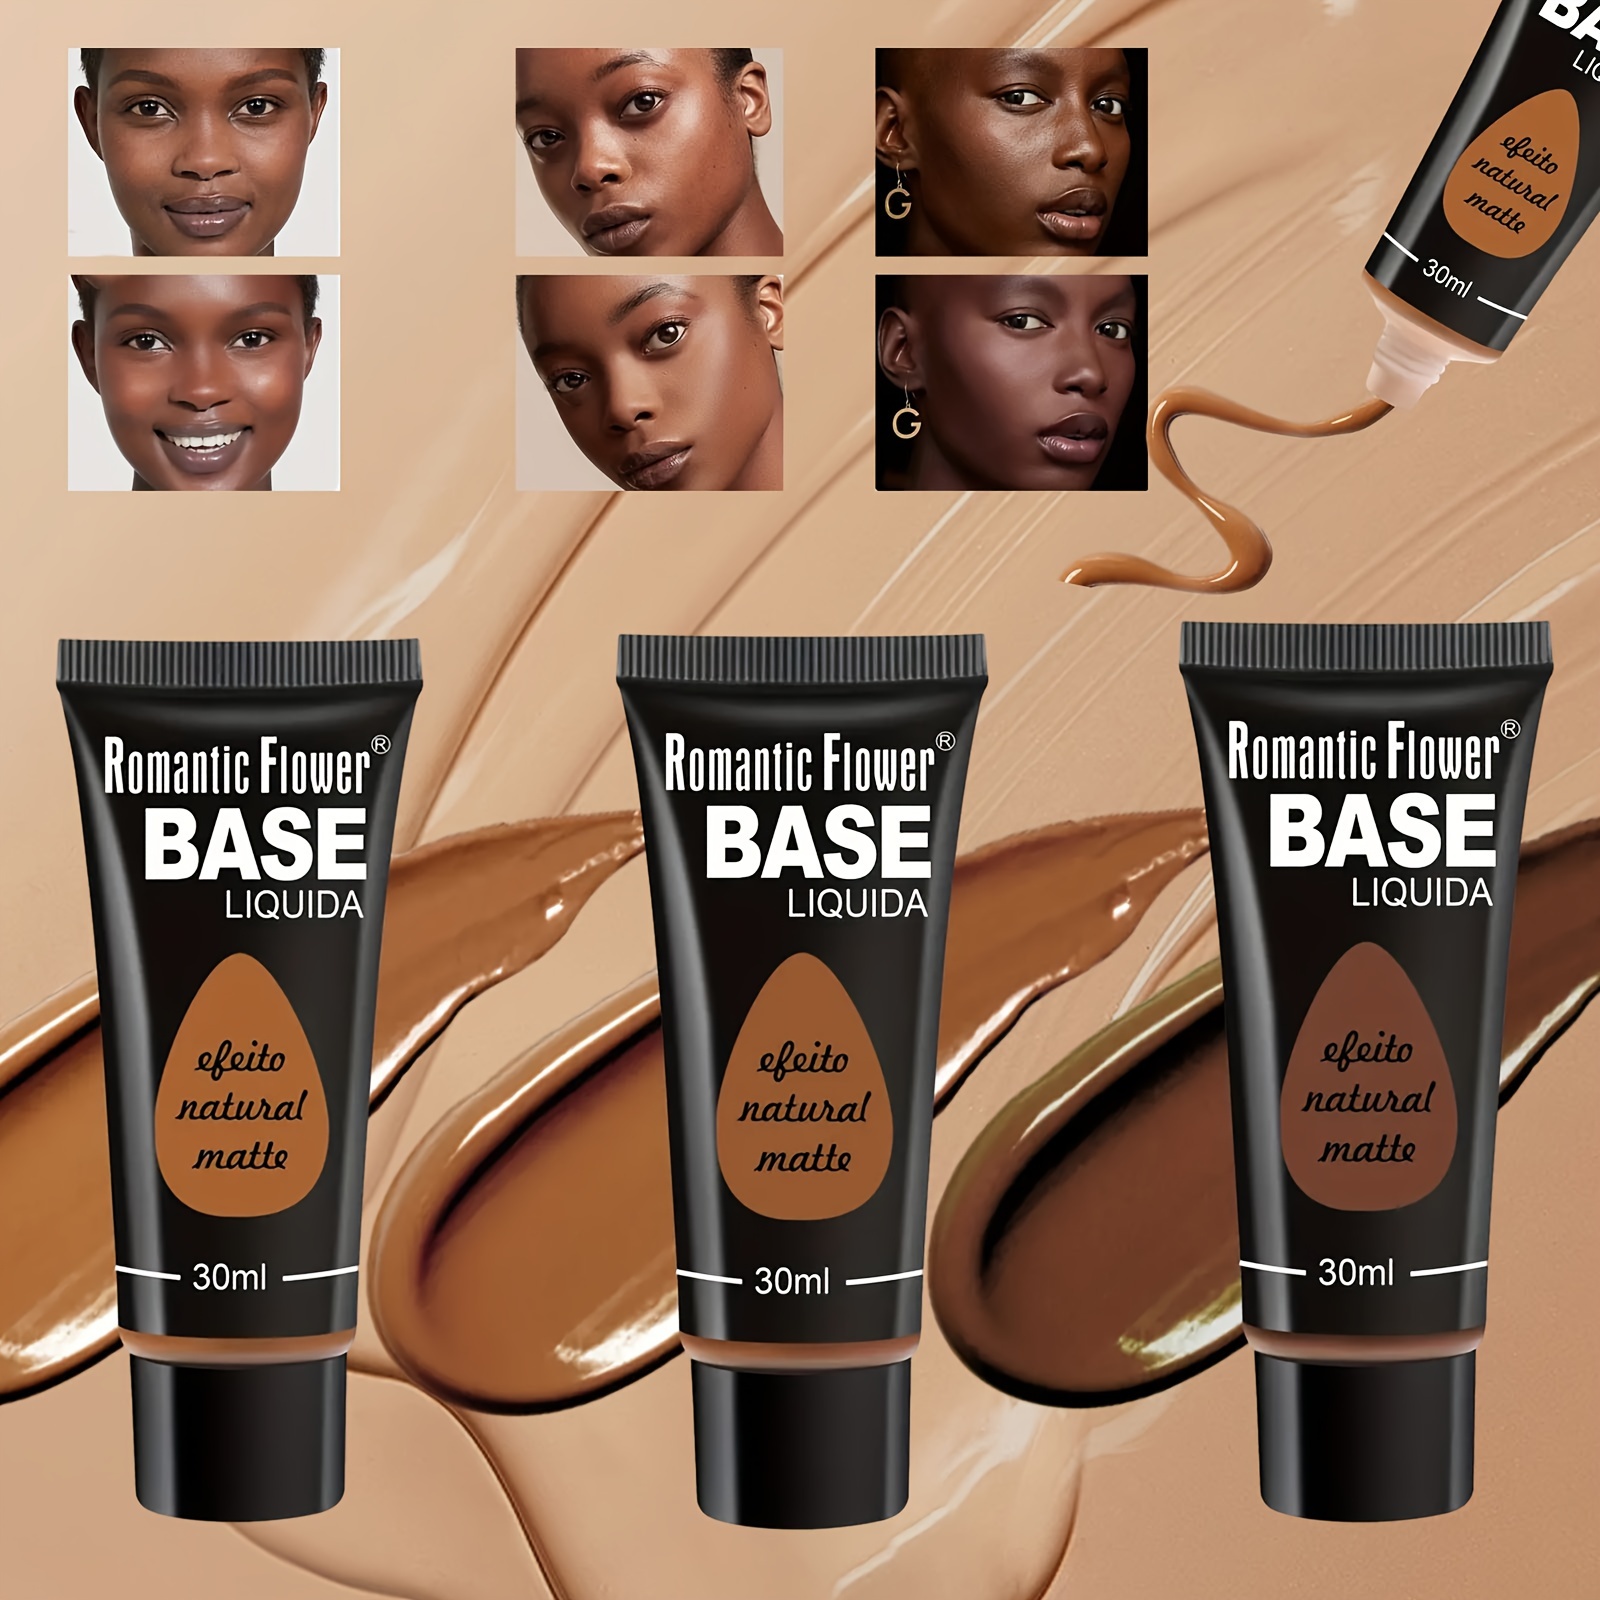 

3-shade Liquid Foundation, Long-lasting Face Color For Normal And Dry Skin, Long-lasting Full Coverage, Matte Finish, Oil Control, 1.0 Oz, For Women With Medium Dark Skin Tones